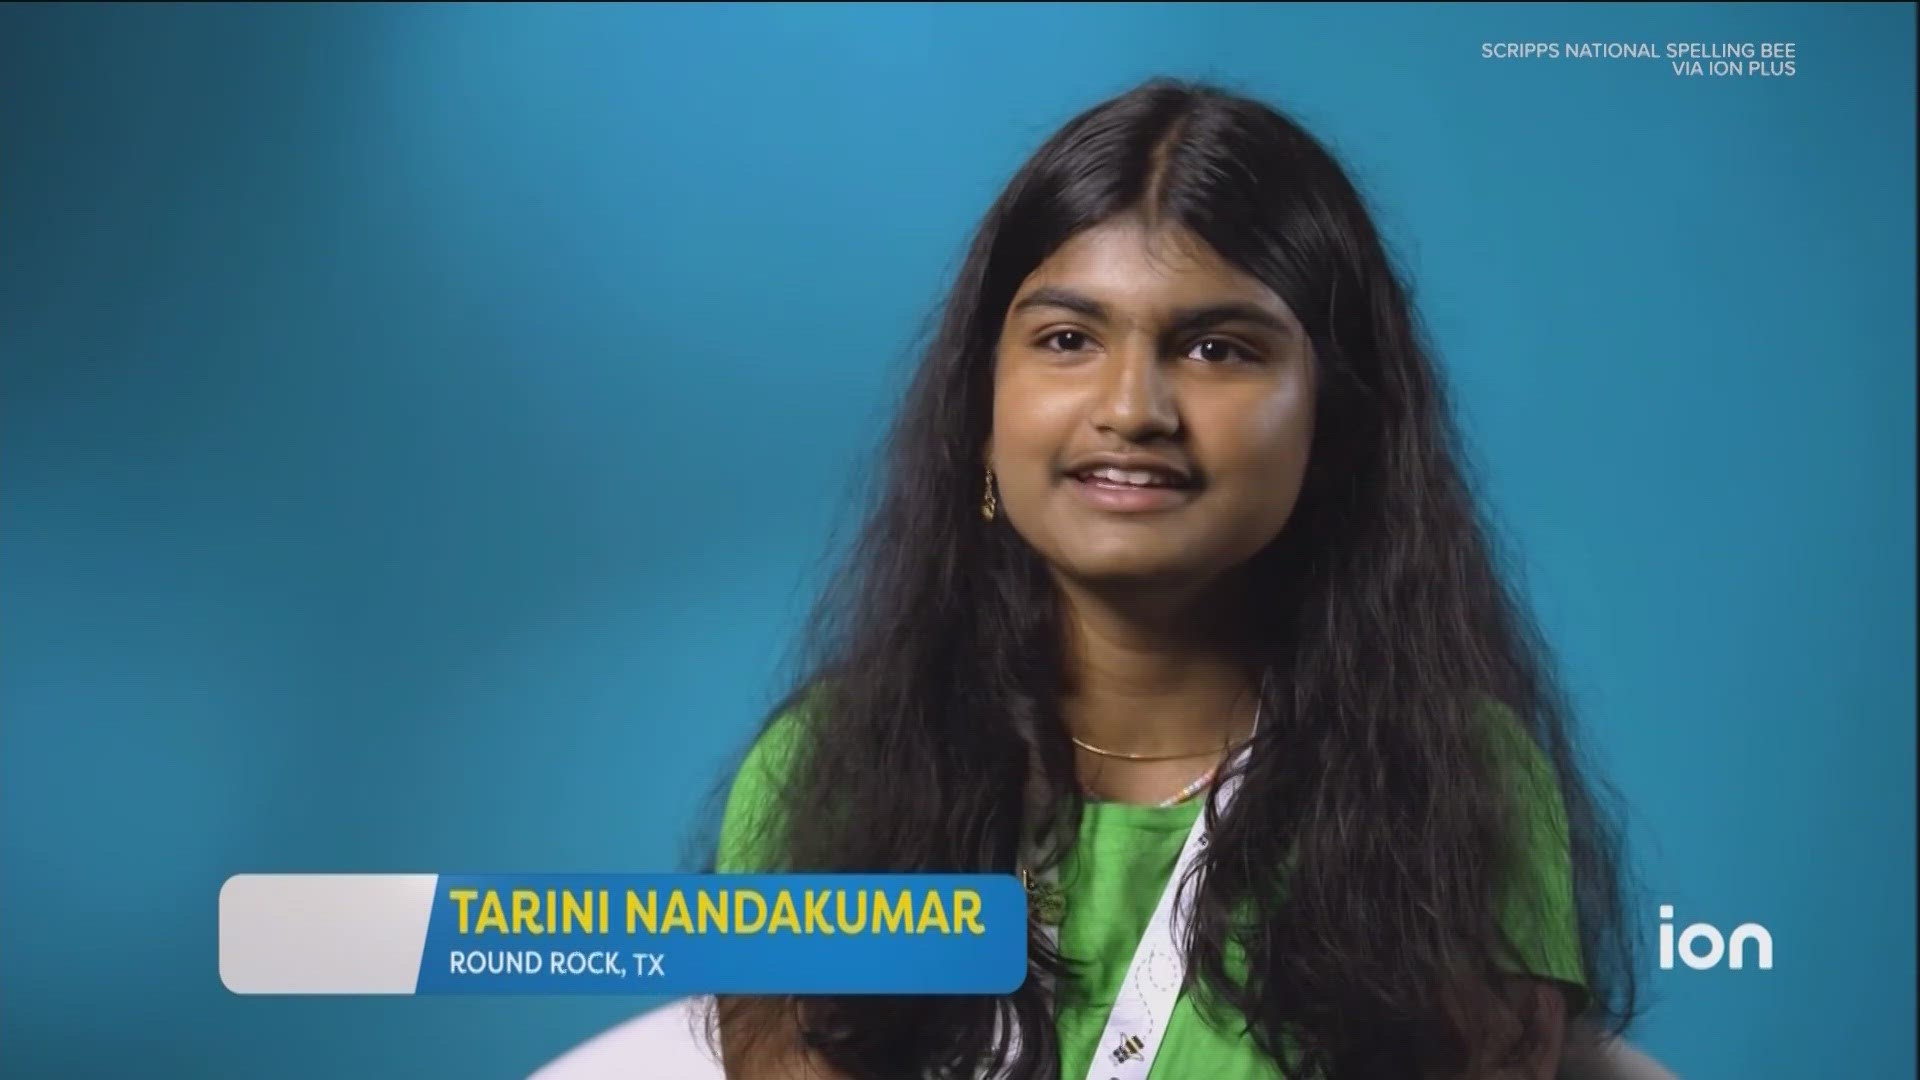 Tarini Nandakumar from Round Rock competed against 230 other contestants to make it to Thursday night's final round of the Scripps National Spelling Bee.